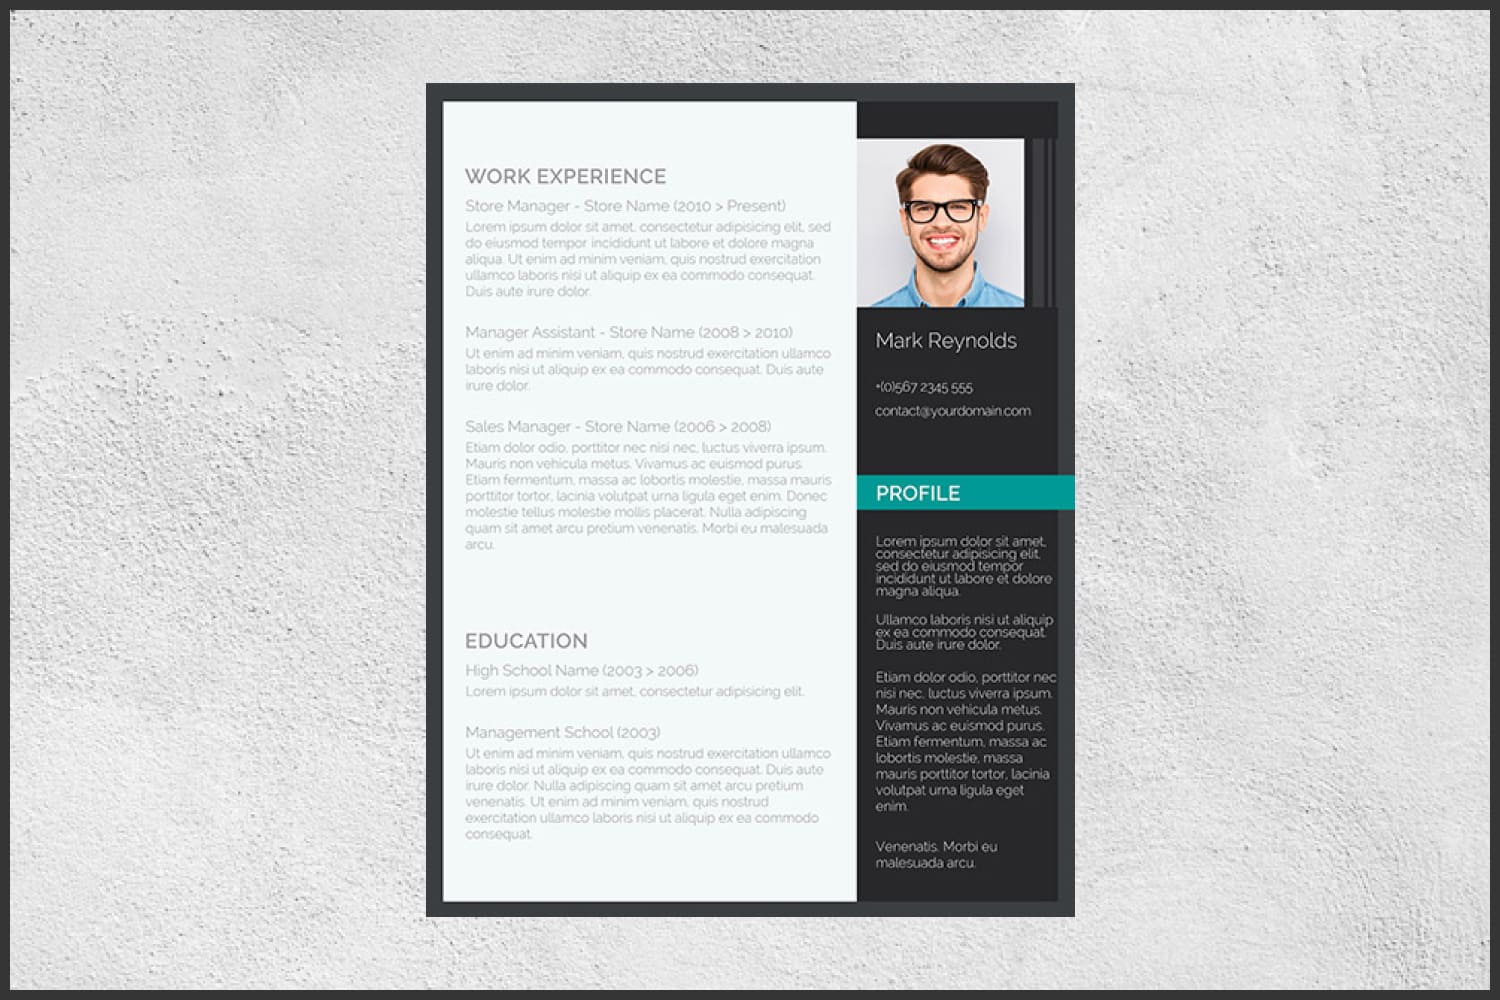 Resume with profile, photo on the right, experience and education with two columns.